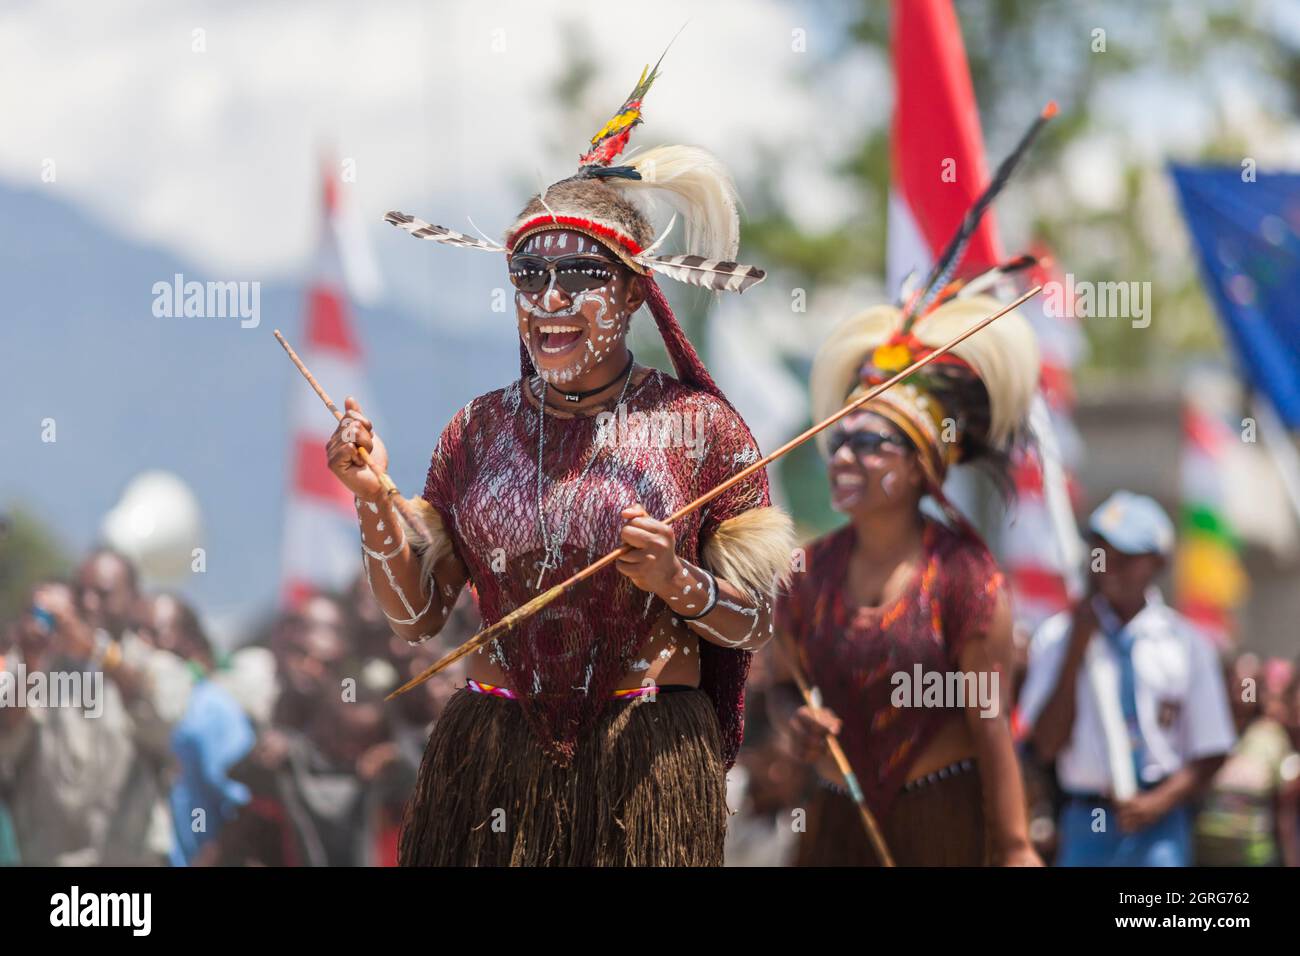 Indonesia, Papua, downtown Wamena, young women from the Dani tribe, celebration of Indonesia's Independence Day. Each tribe is invited to parade with the Indonesian flag, while showcasing its culture through traditional dances and clothes, in order to reinforce the feeling of cultural freedom. Stock Photo